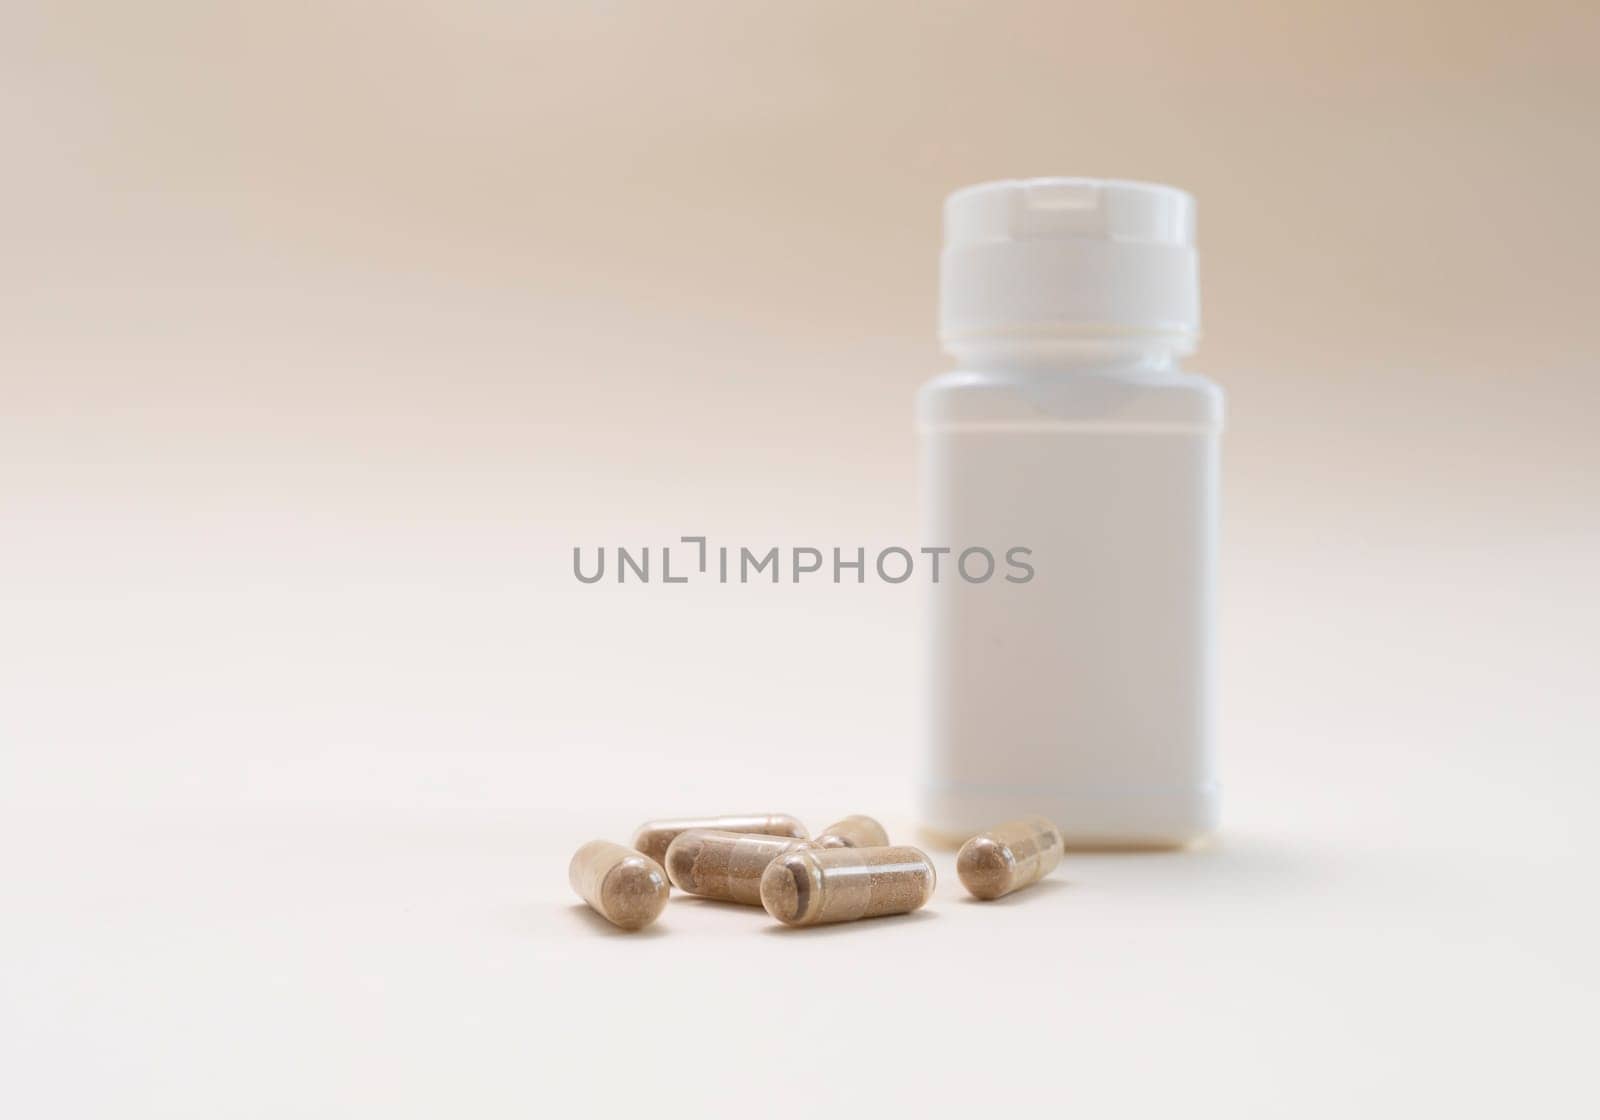 Slippery Elm Pills, Softgels and White Empty Bottle, Container on Beige Background. Mockup Pharmacy. Copy Space For Text. Horizontal Plane. Healthy Lifestyle. Probiotic. High quality photo